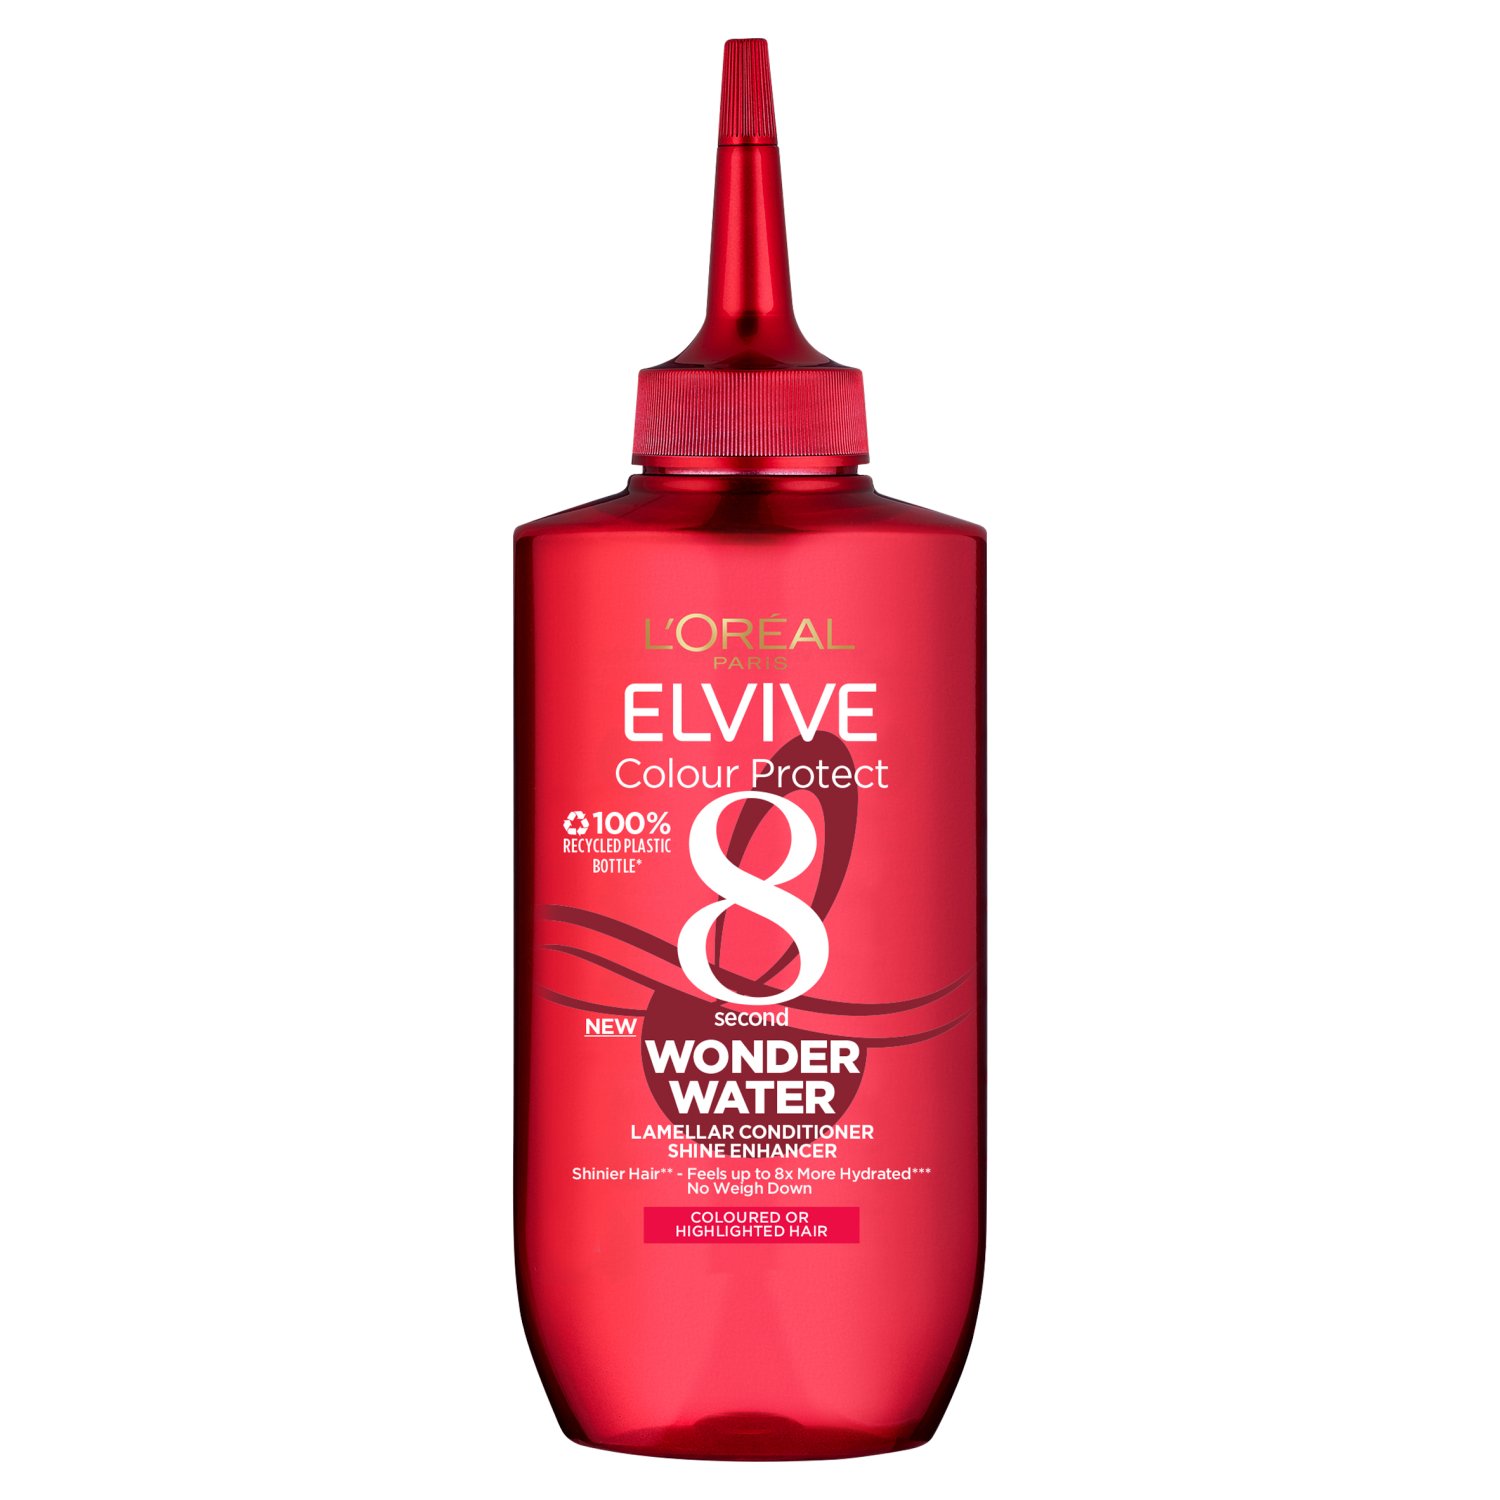 L'oreal Elvive Colour Protect Wonder Water (200 ml)